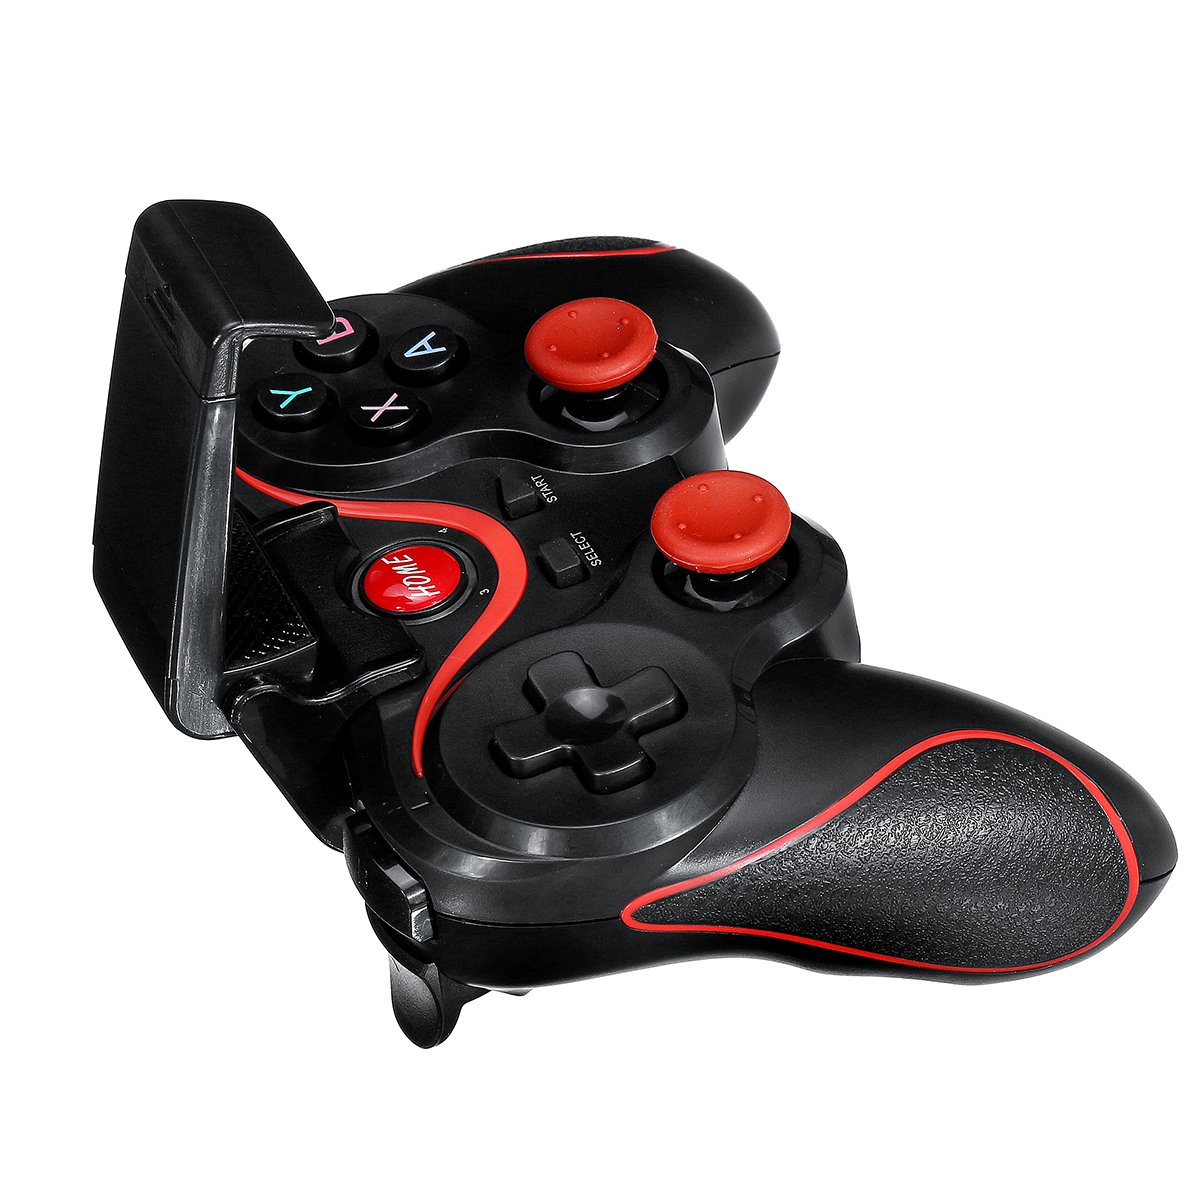 T3-bluetooth-Wireless-Gamepad-Gaming-Controller-for-iOS-Android-Mobile-Phone-Tablet-PC-VR-Glasses-Ga-1698597-6